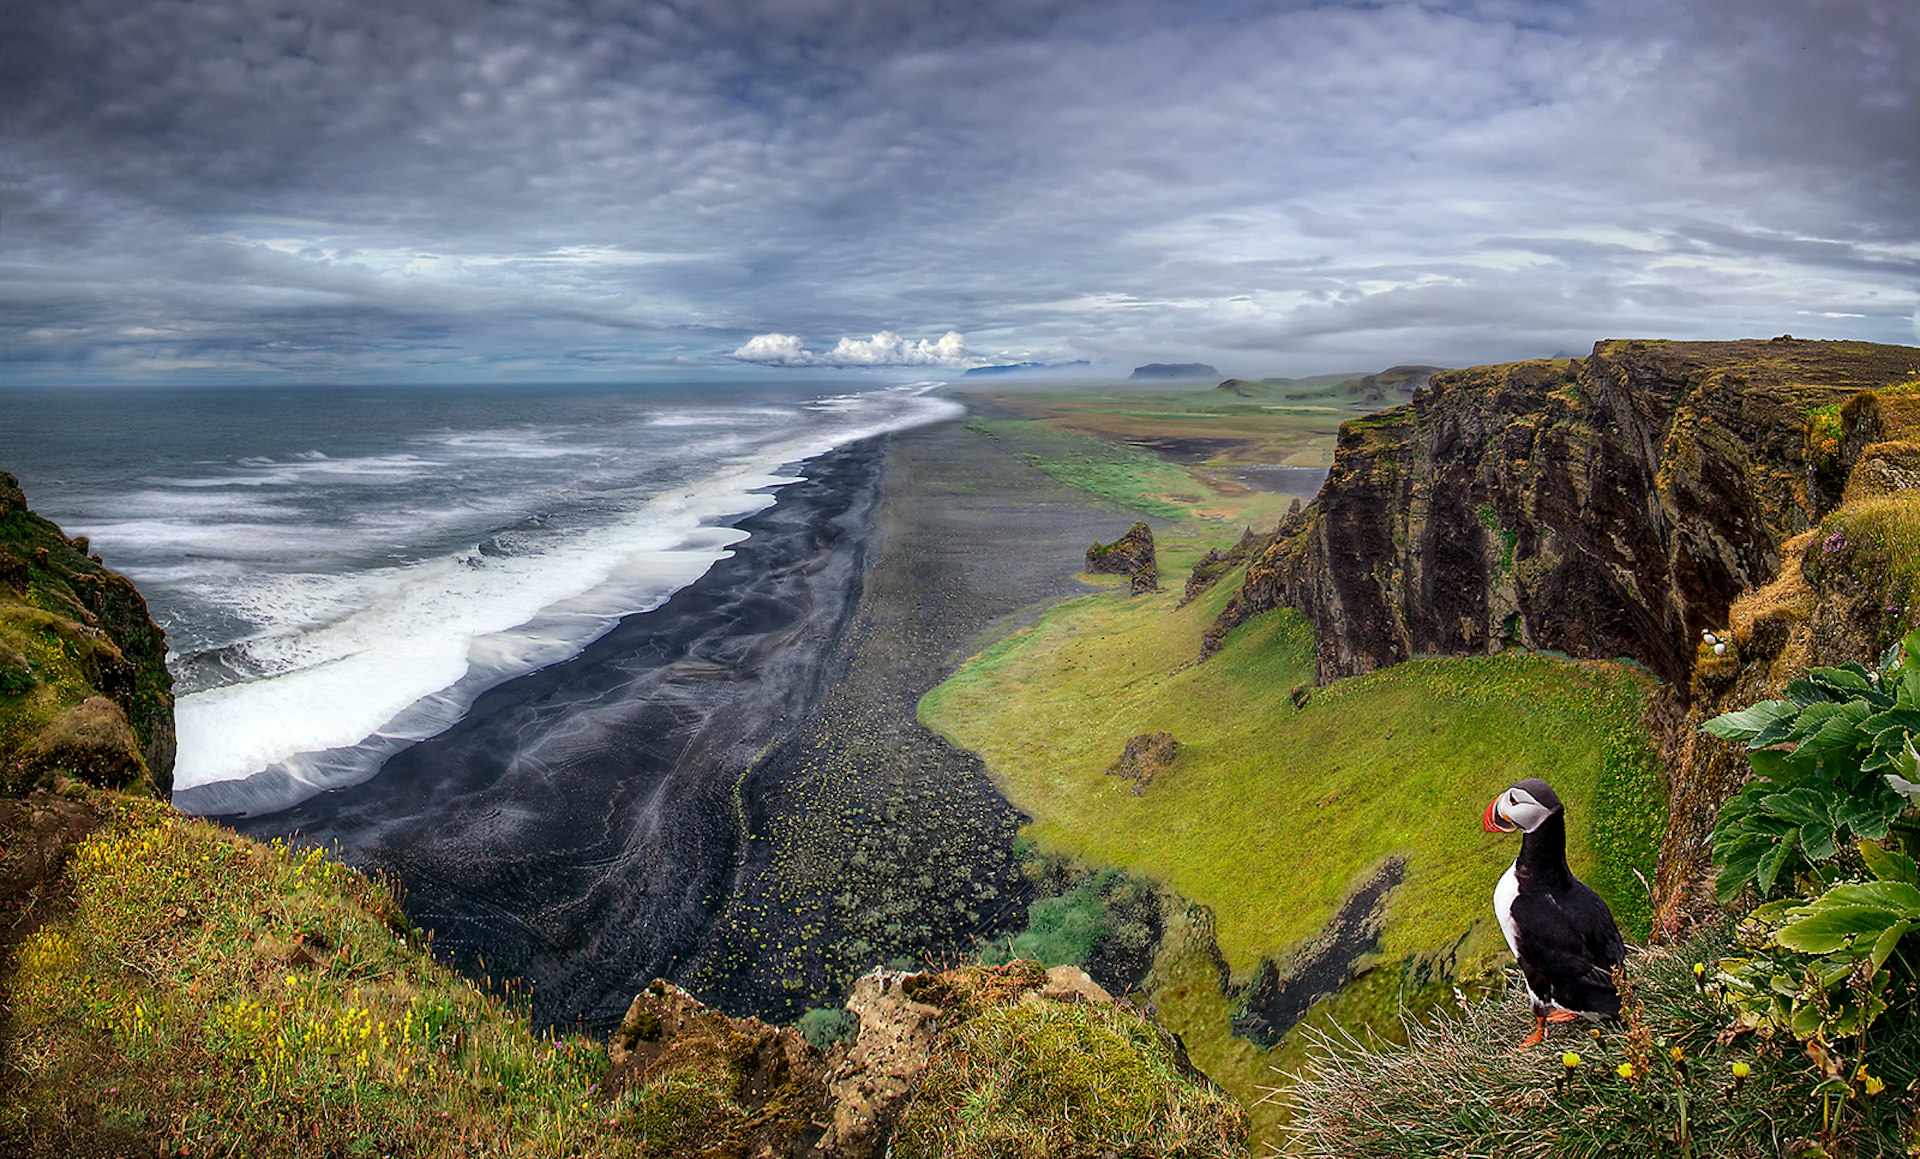 A puffin stands on a rock ledge overlooking the black beaches of Vík, Iceland.